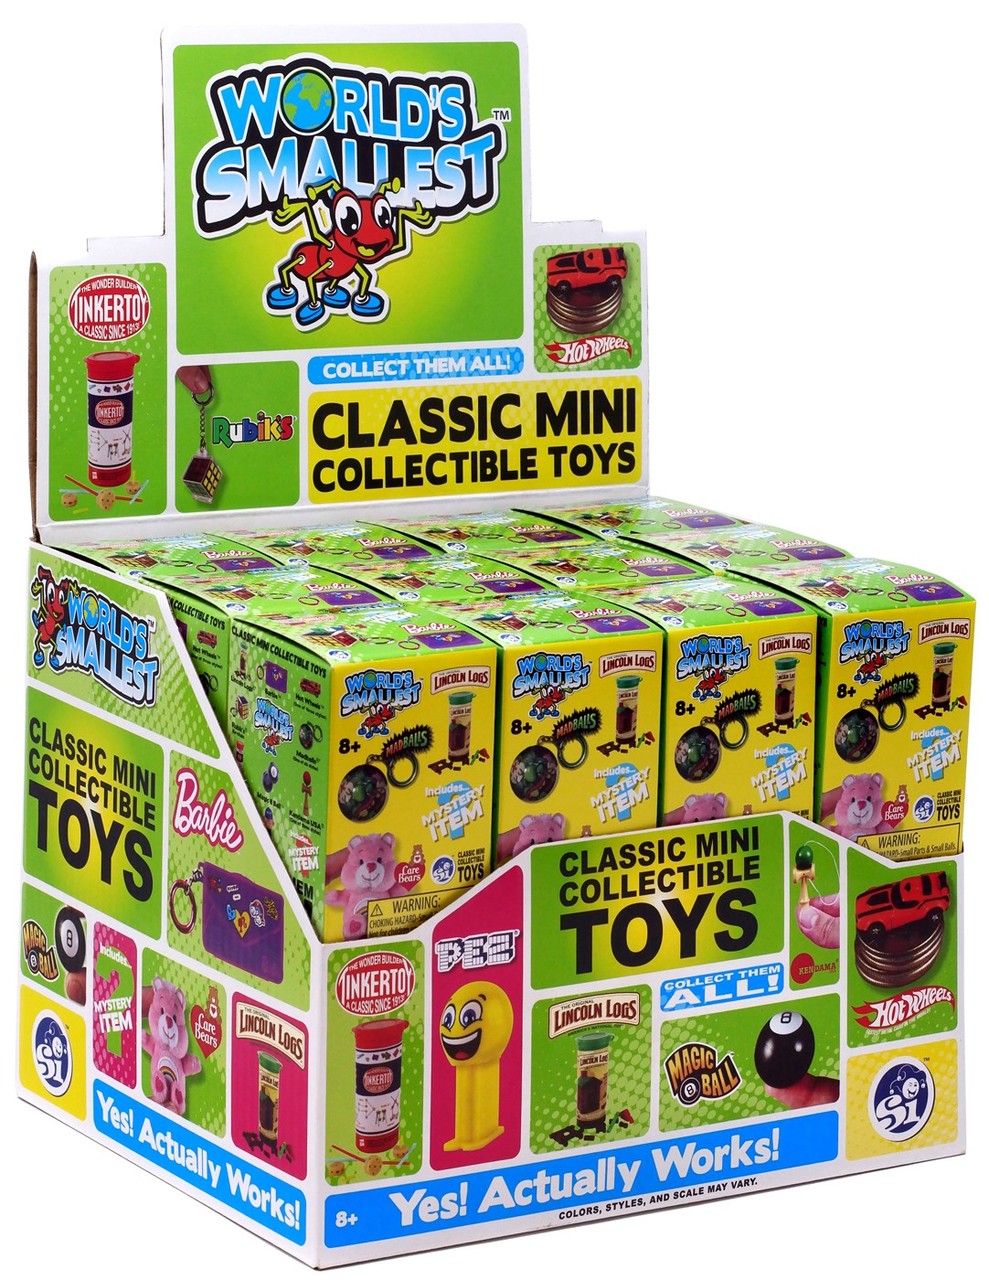 world's smallest classic mini collectible toys blind box